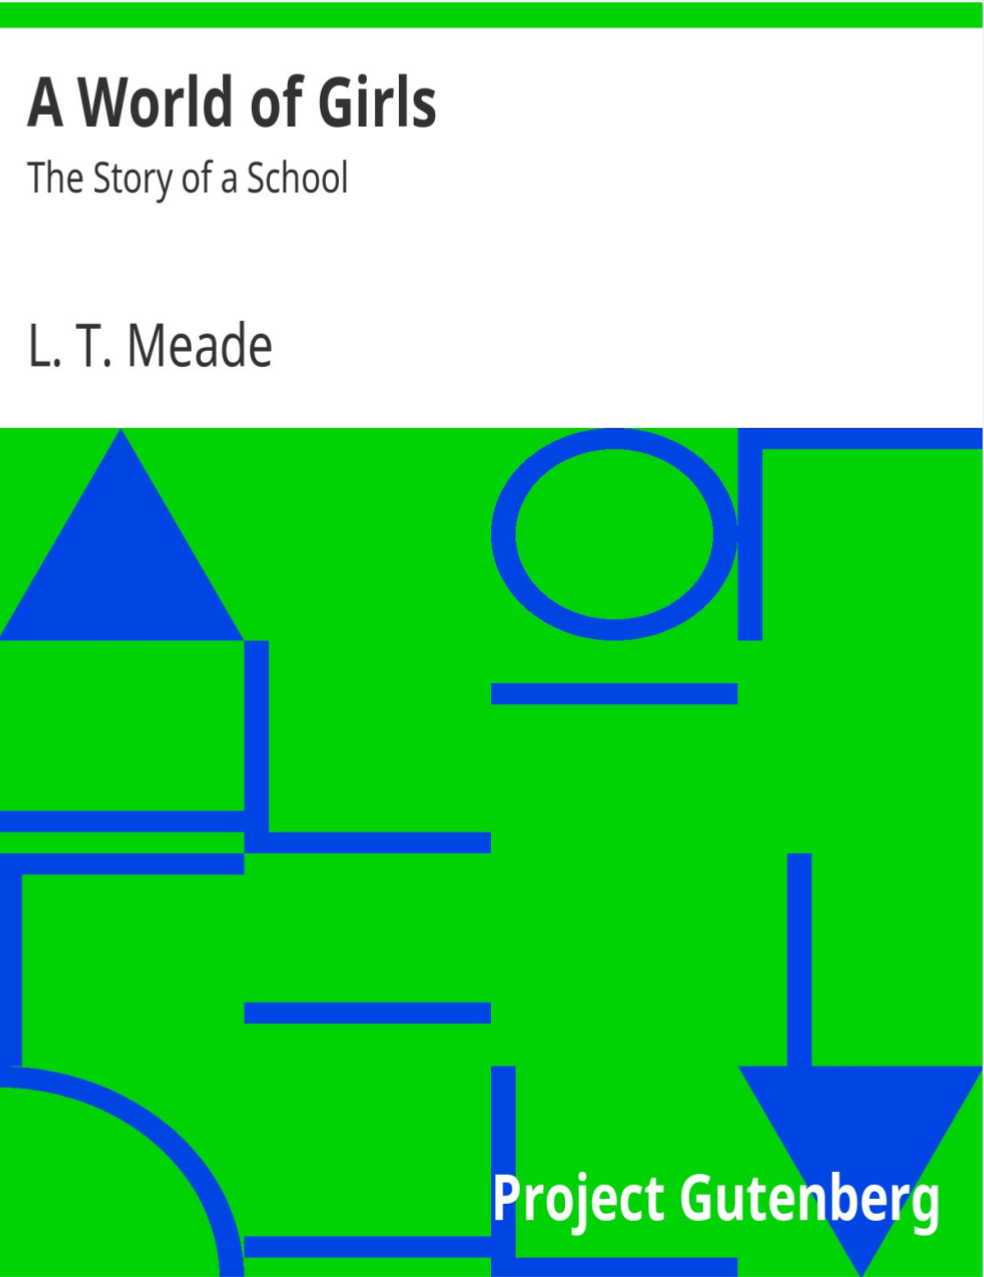 A WORLD OF GIRLS BY L.T MEADE